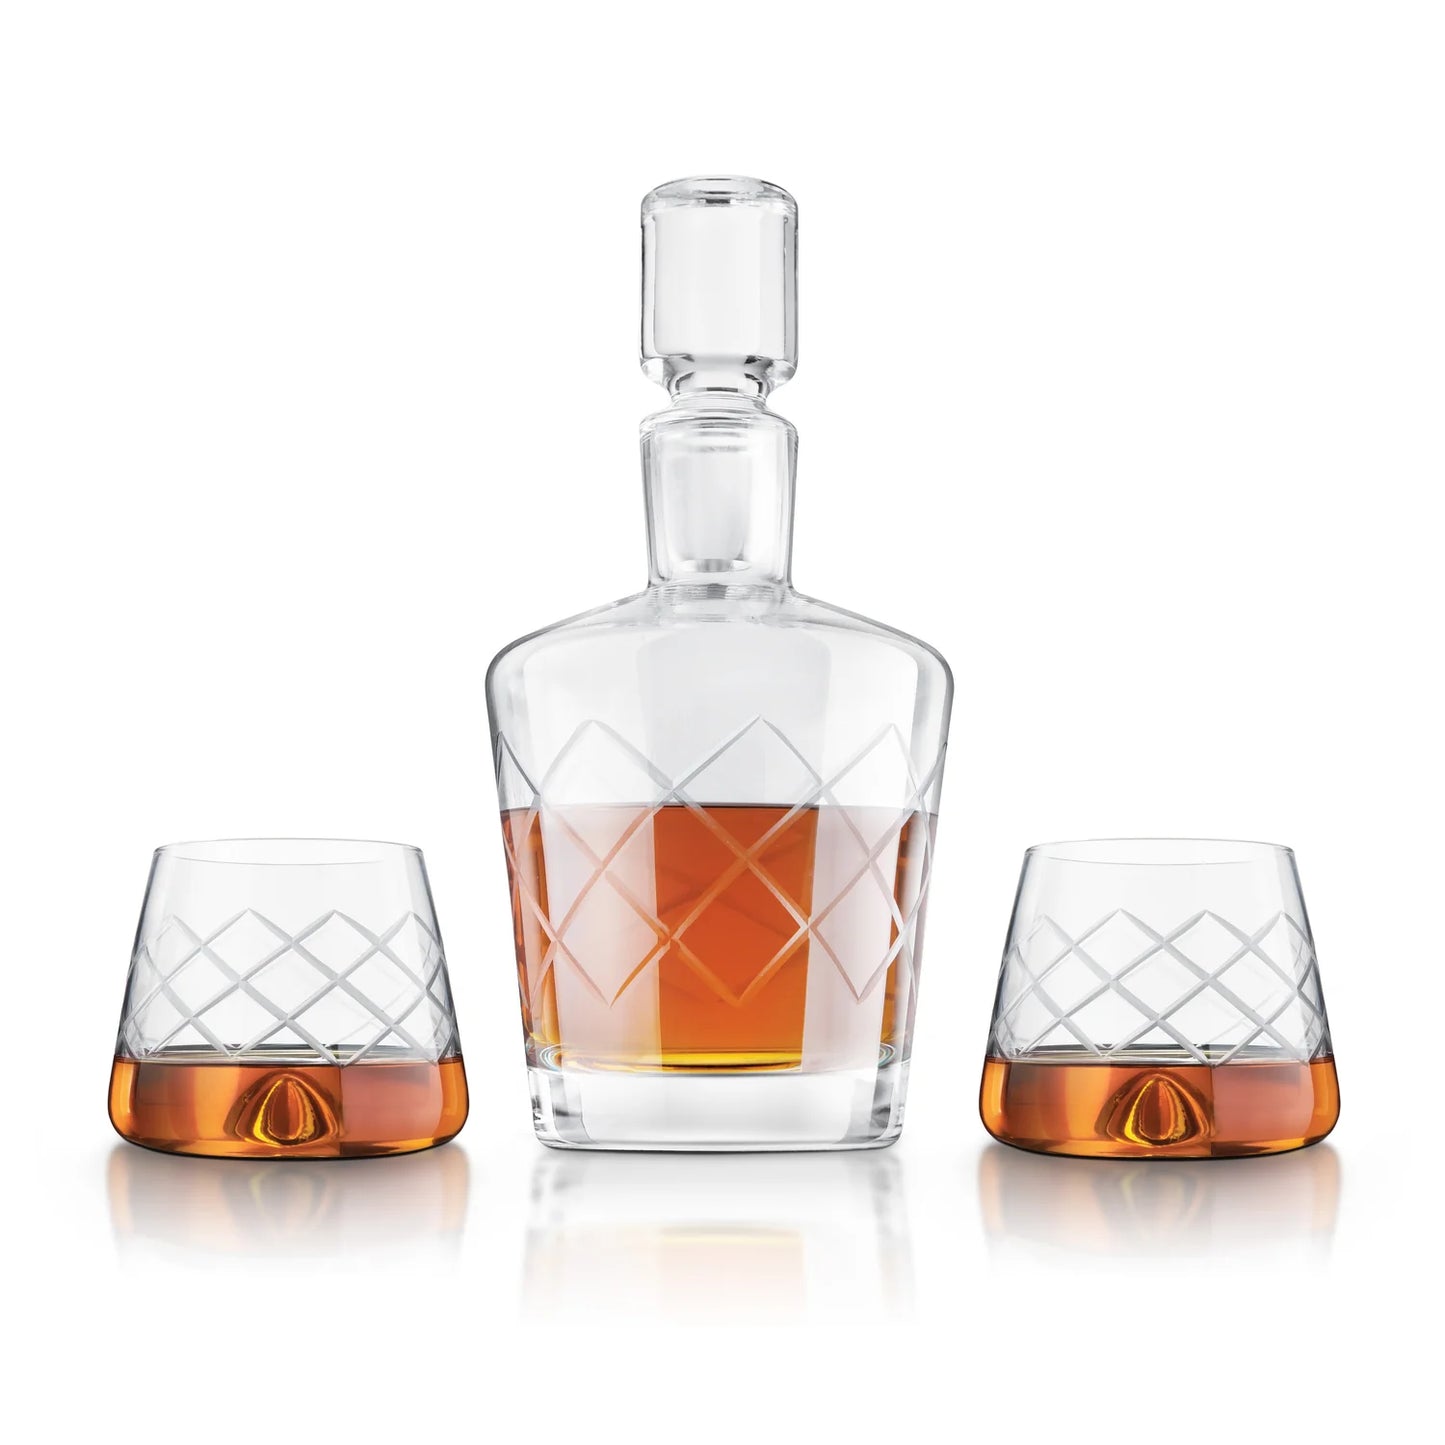 FINAL TOUCH CRYSTAL WHISKEY DECANTER SET